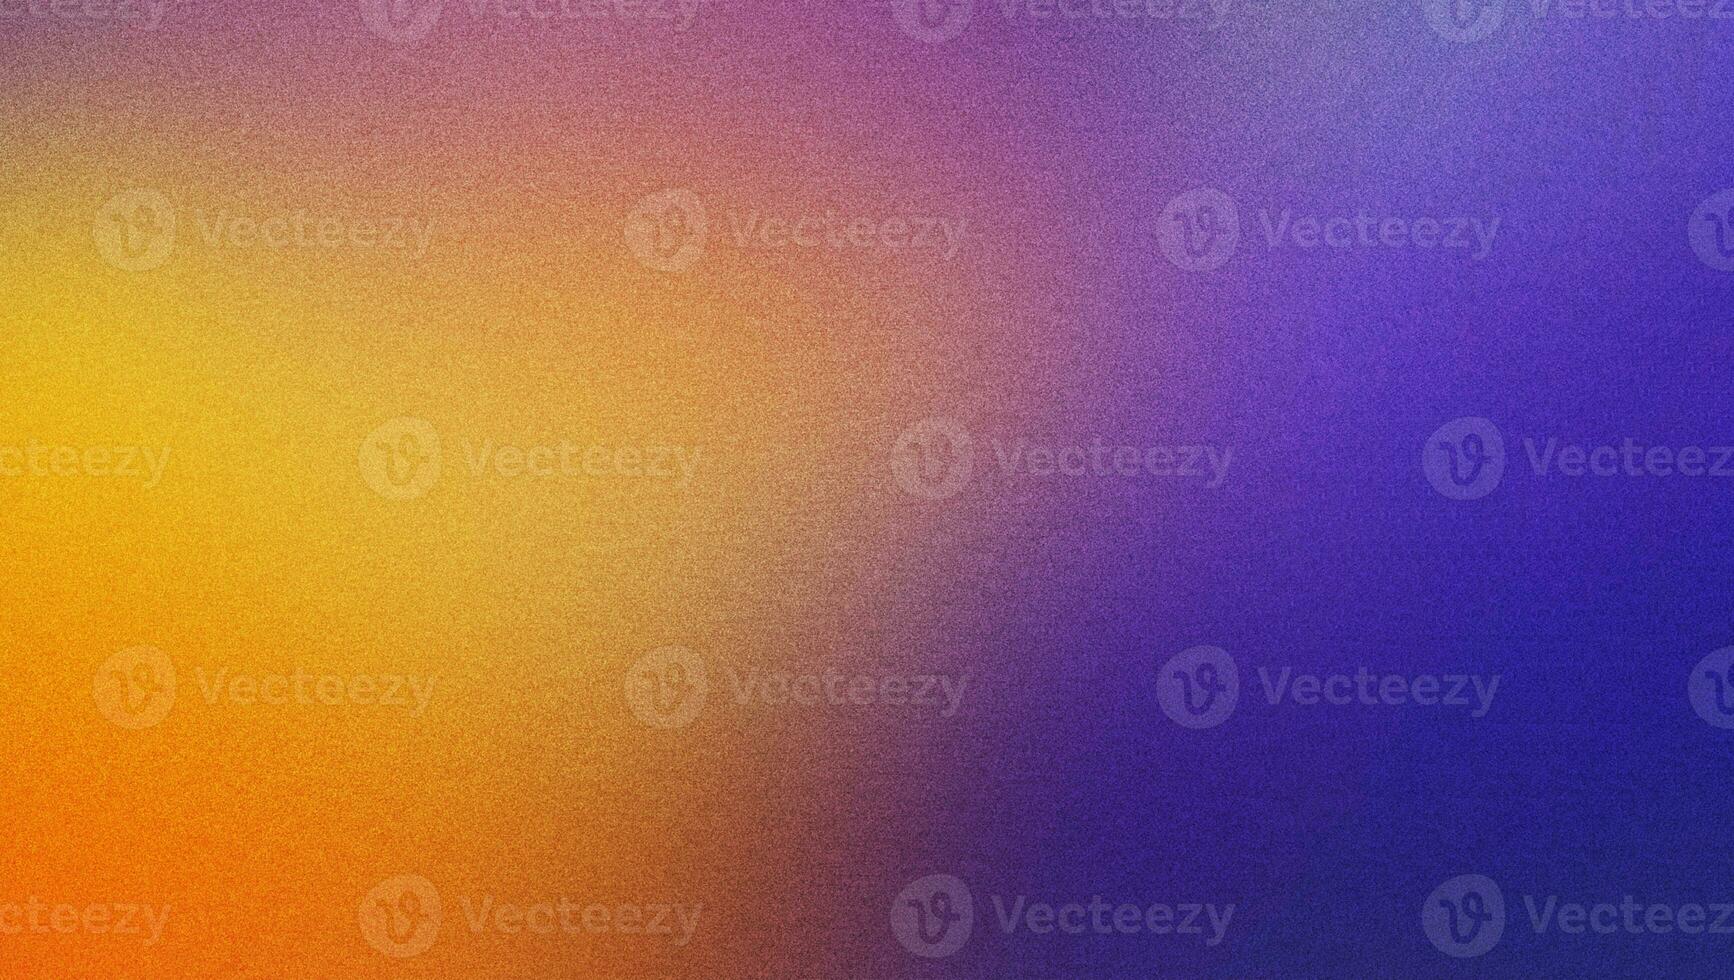 Moraste Gradient Background Texture, abstract grainy texture and a gradient background of orange, purple, and blue colors photo